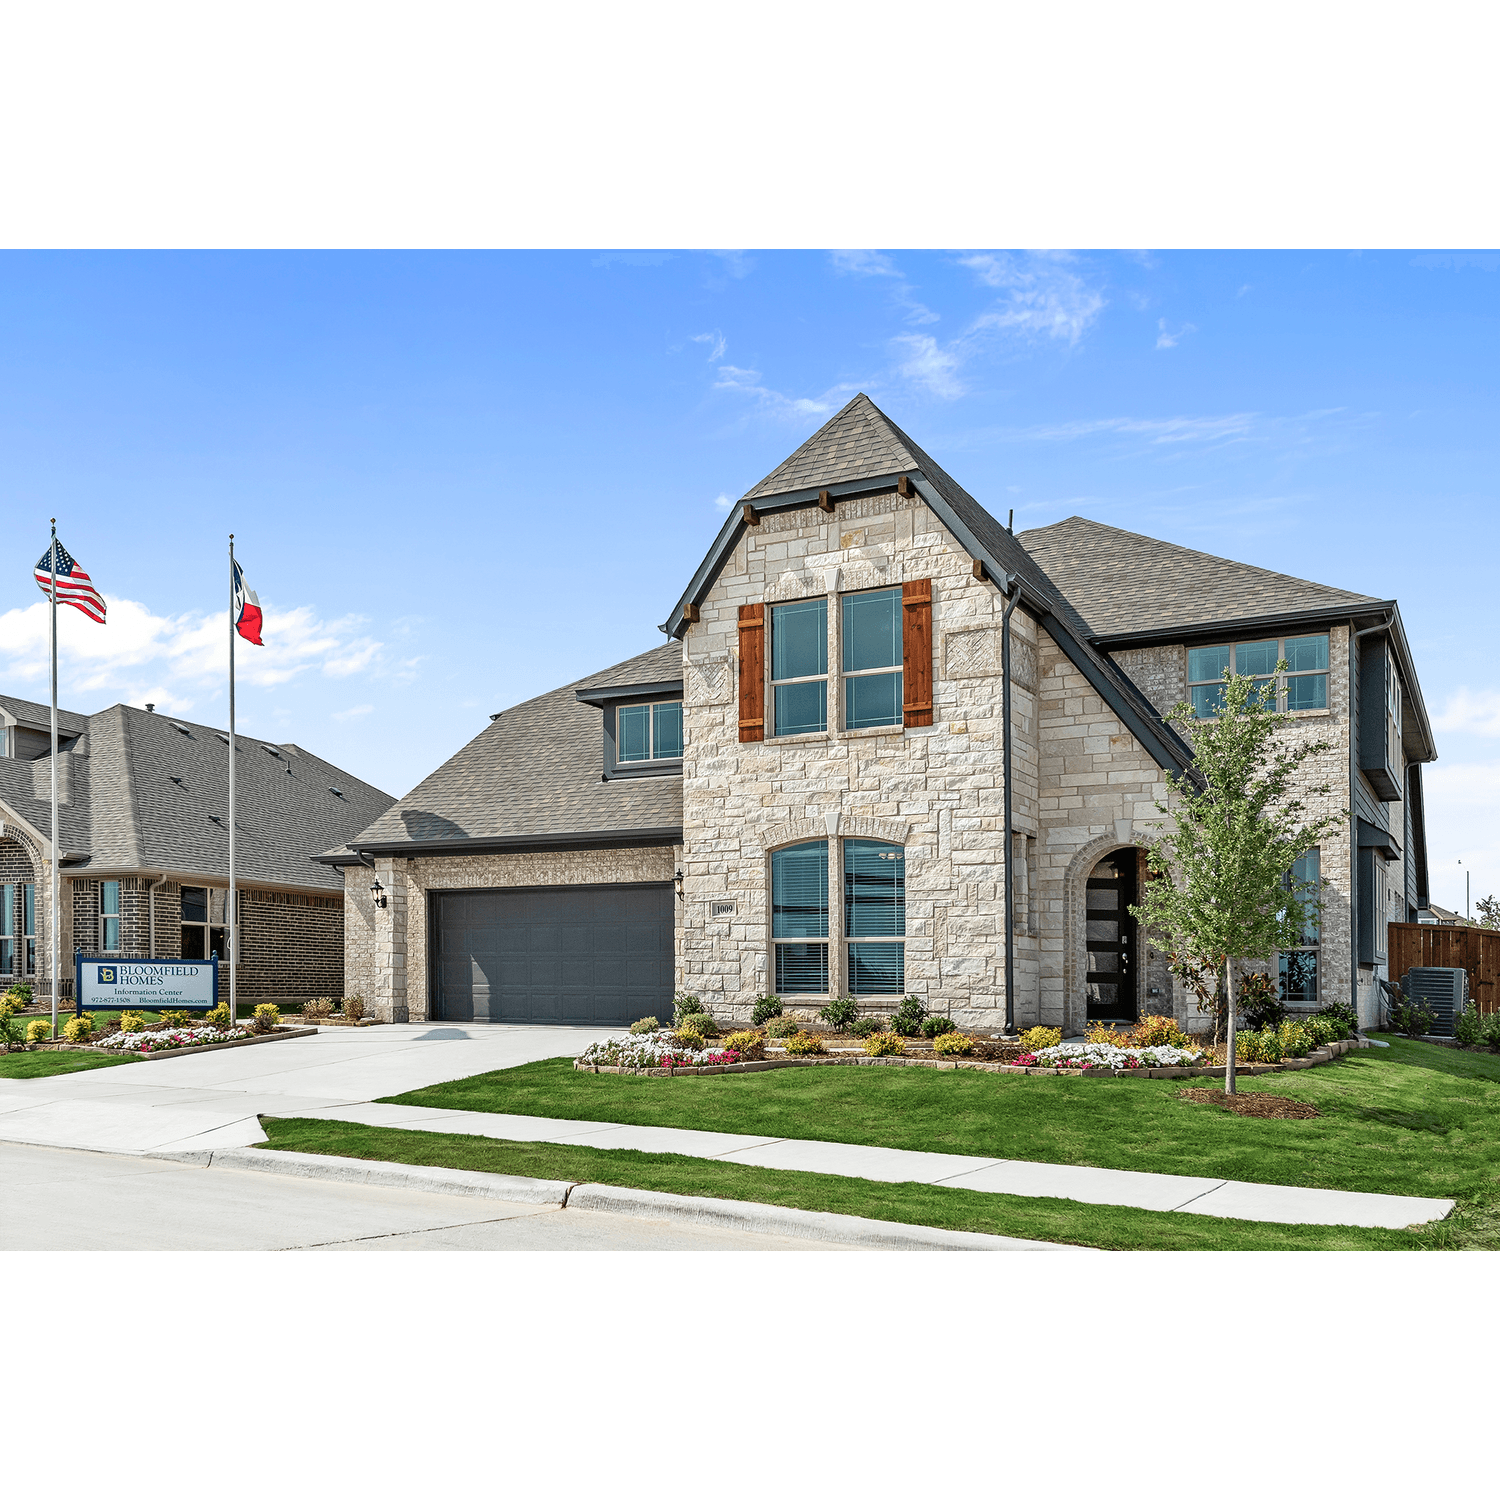 14. Wildflower Ranch xây dựng tại 1009 Canuela Way, Fort Worth, TX 76247